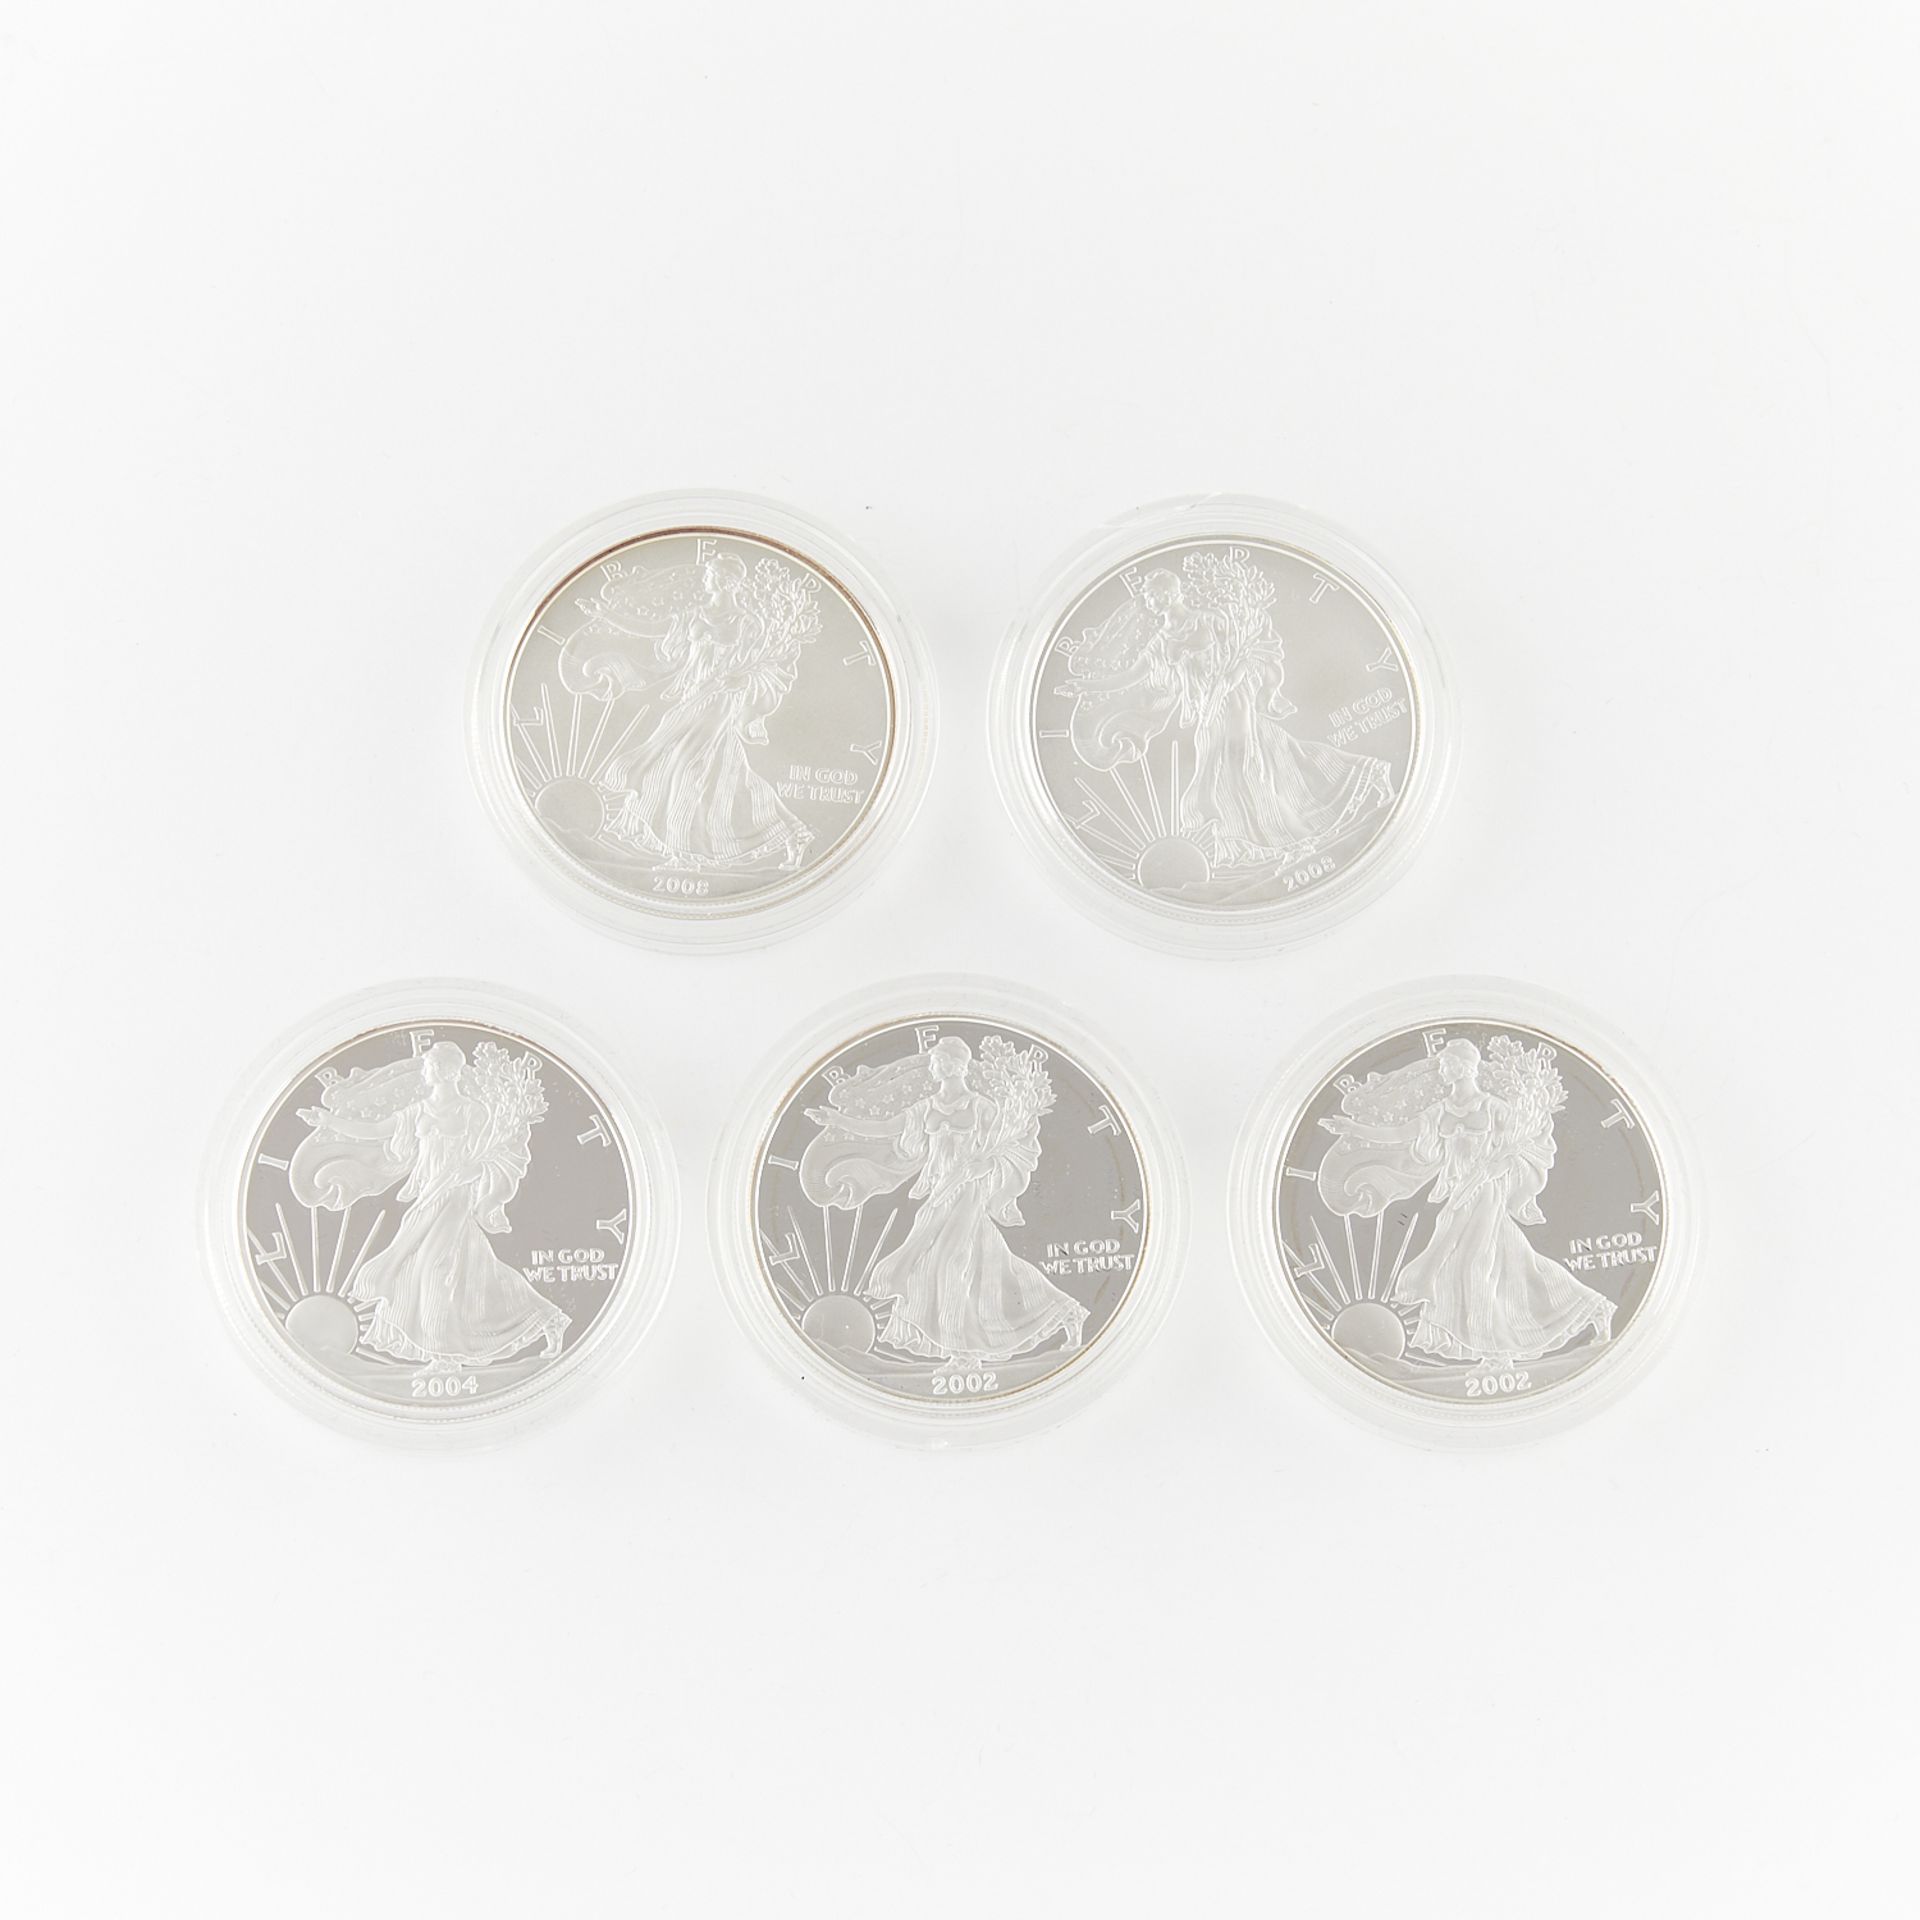 5 $1 American Eagle Silver Proof Coins